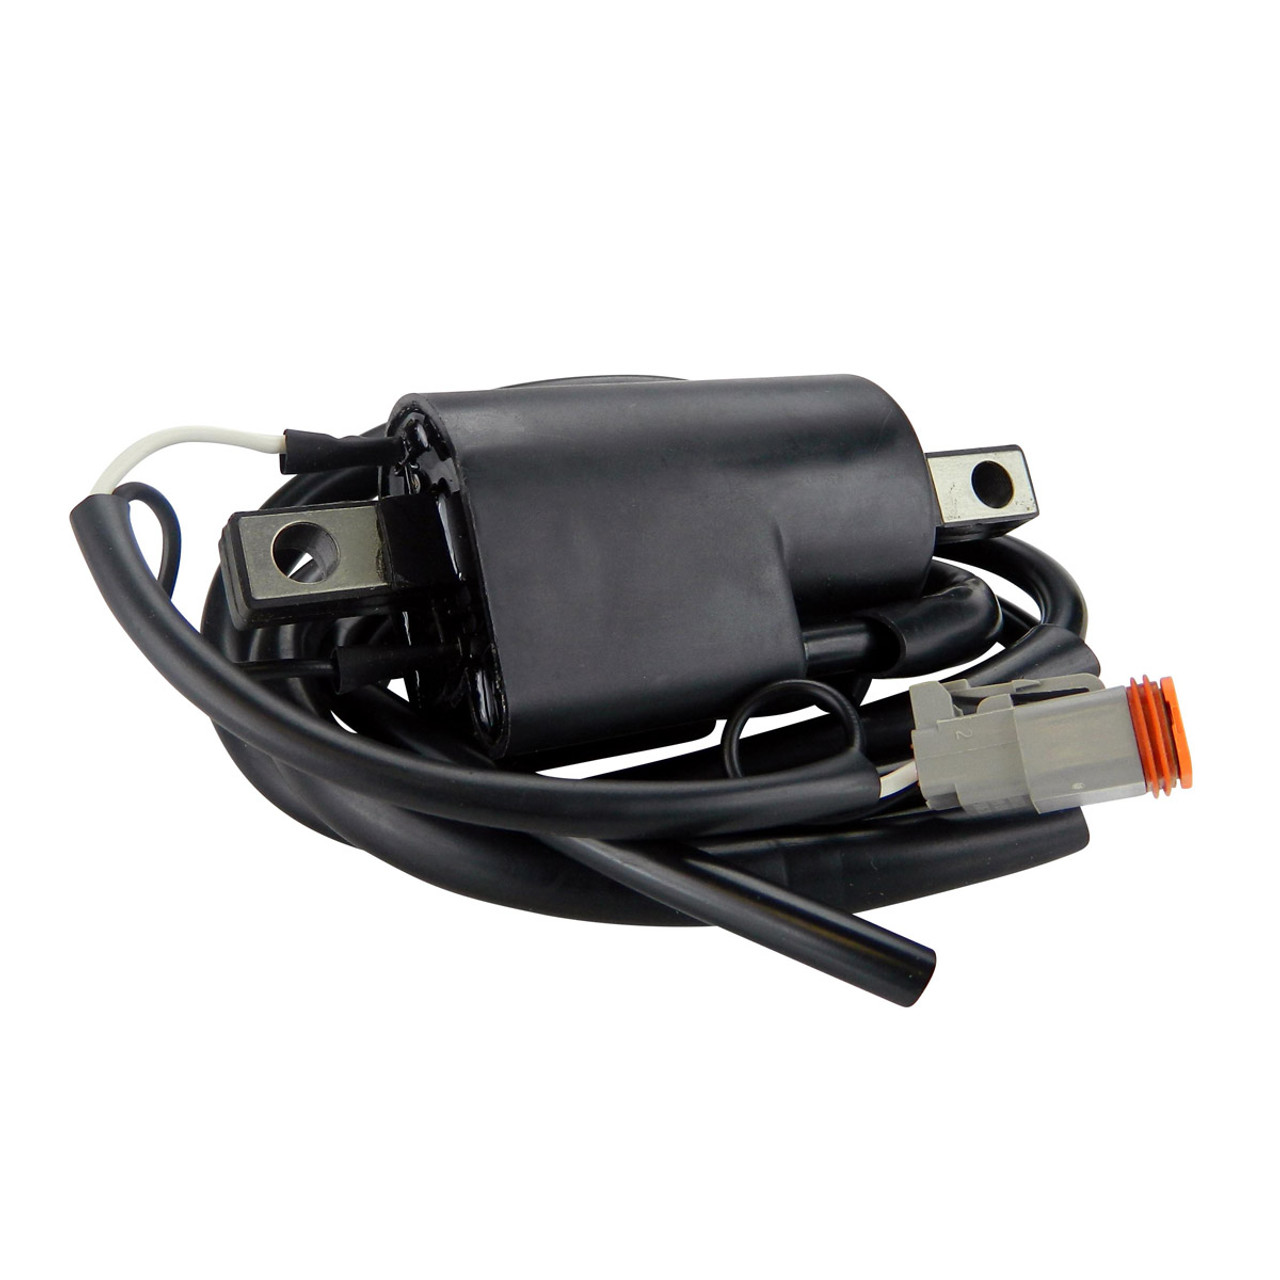 RMSTATOR New Aftermarket Ski-doo External Ignition Coil, RMS060-104432